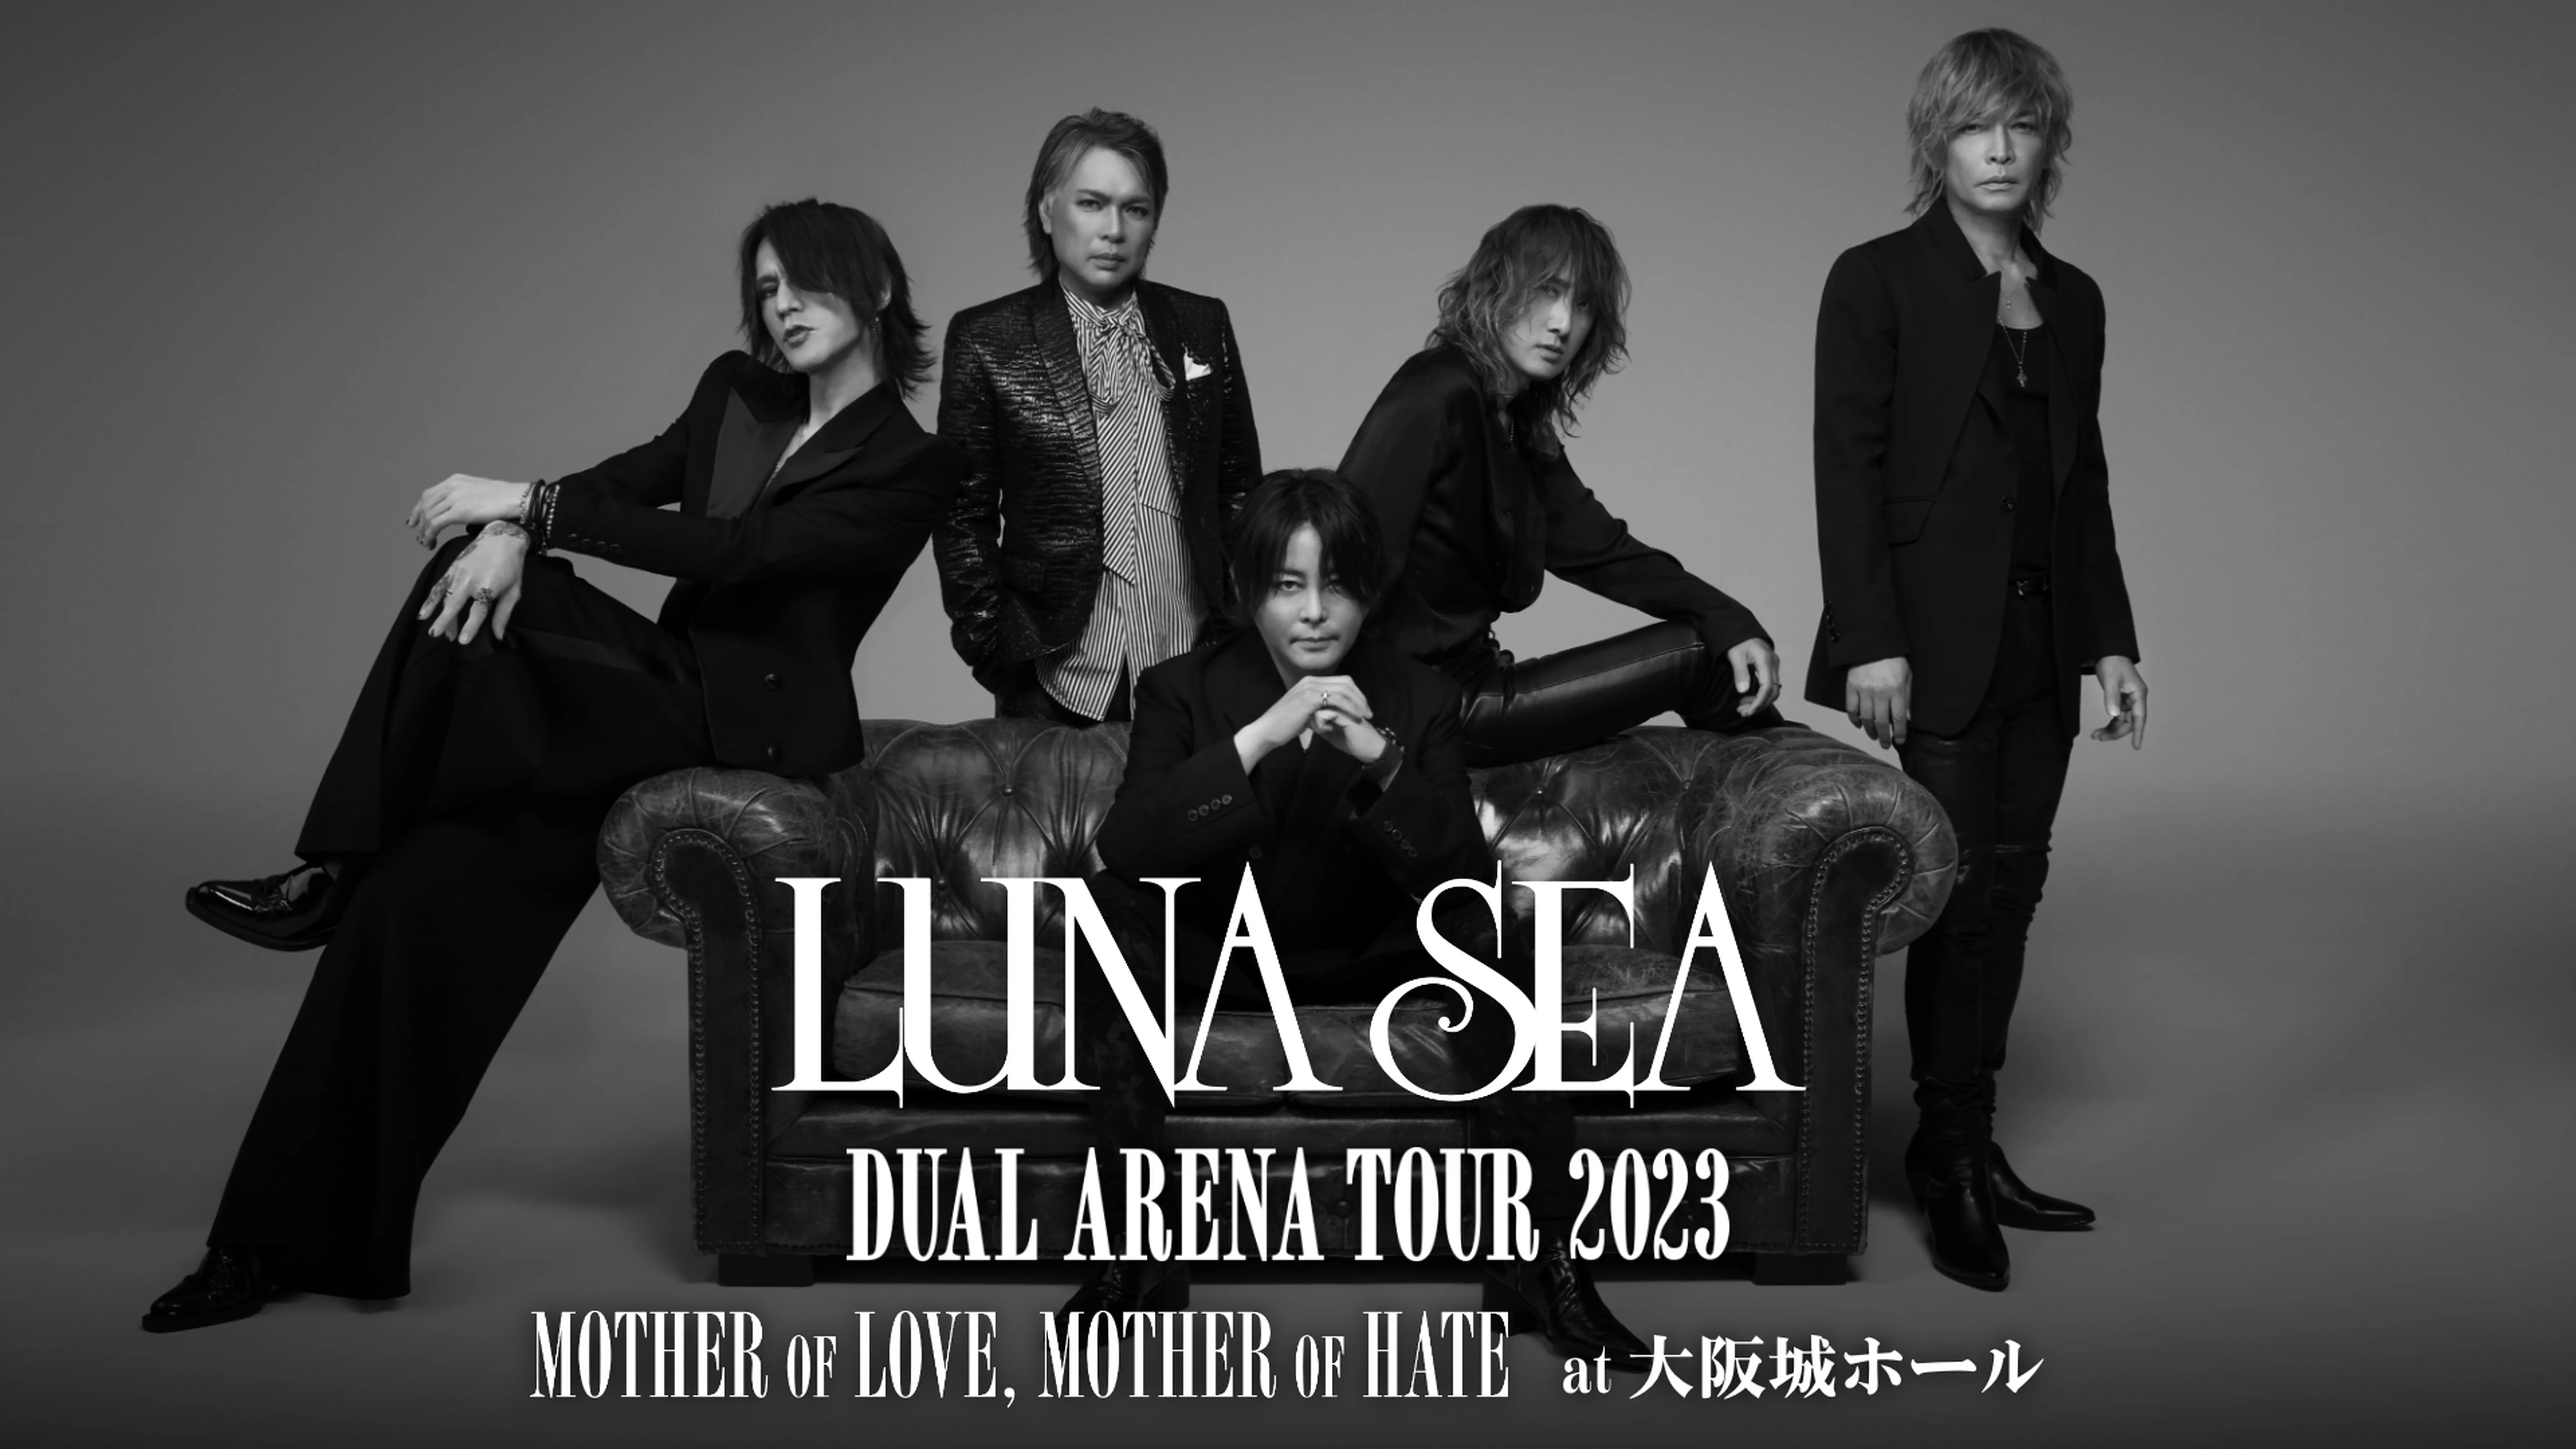 LUNA SEA DUAL ARENA TOUR 2023 -END OF DUAL- MOTHER OF LOVE, MOTHER OF HATE at 大阪城ホール